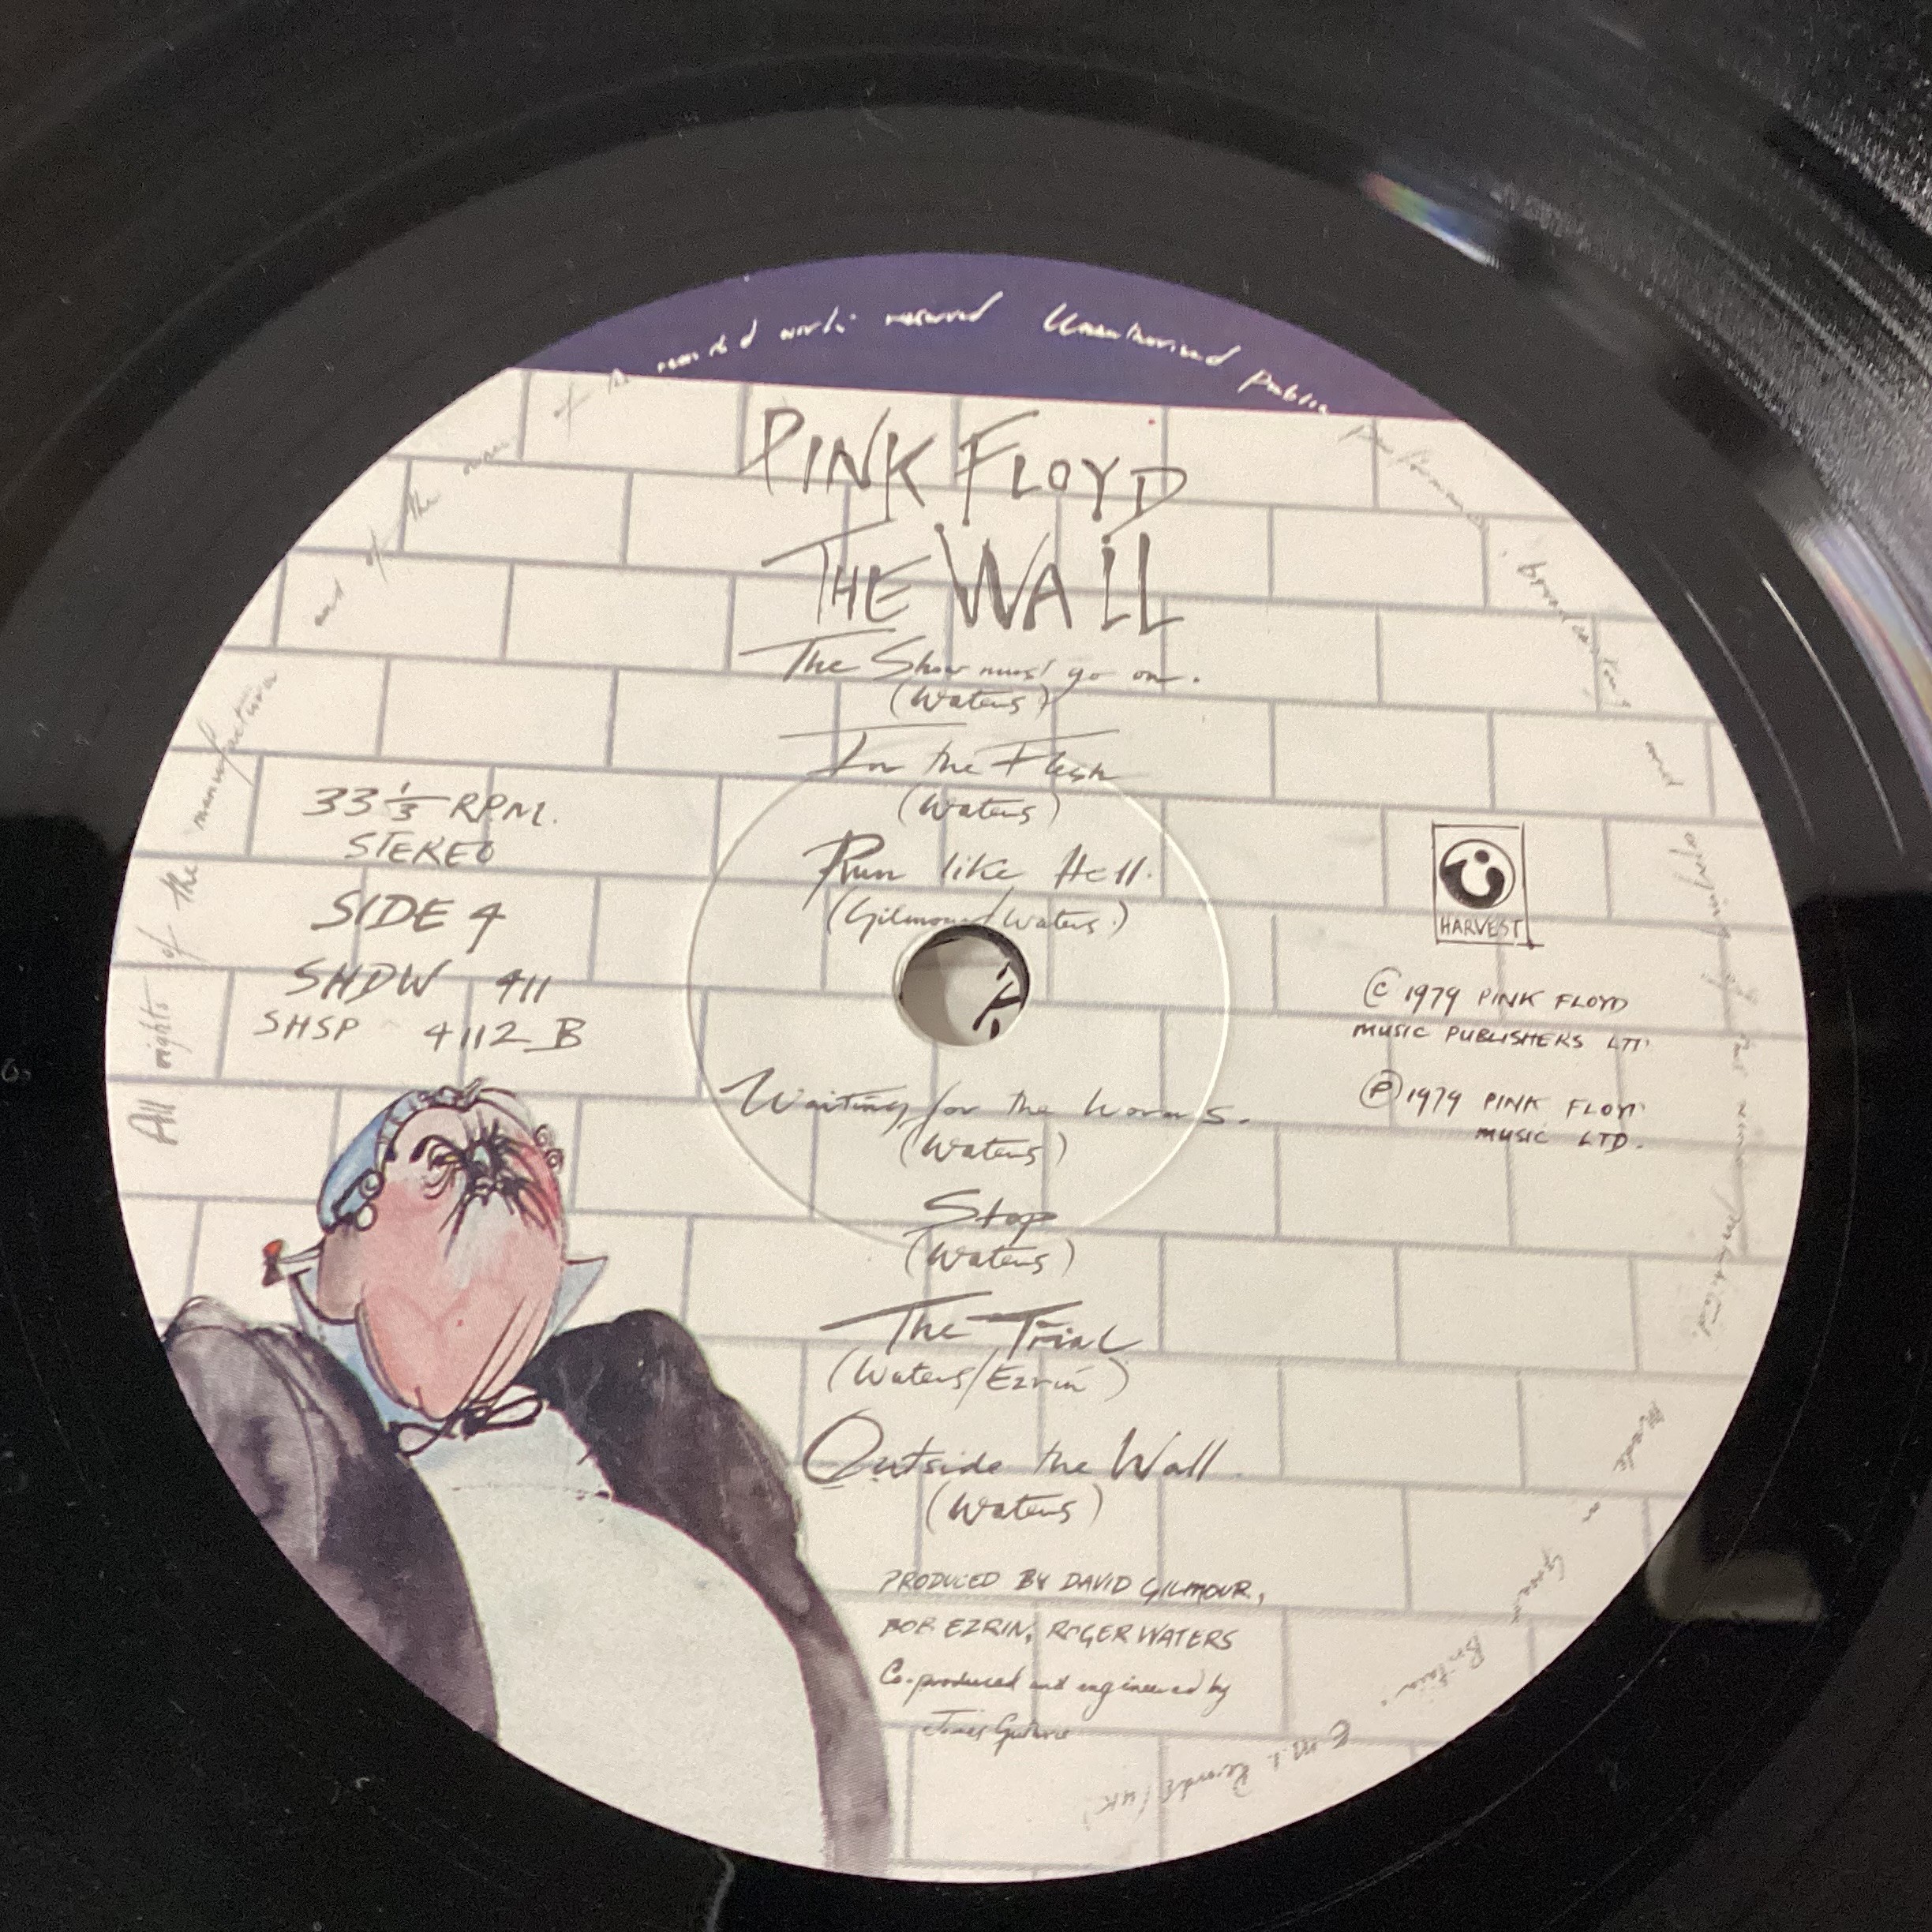 PINK FLOYD VINYL LP RECORDS X 2. Copies here include ‘The Wall’ double album on Harvest SHDW 411 - Bild 6 aus 9